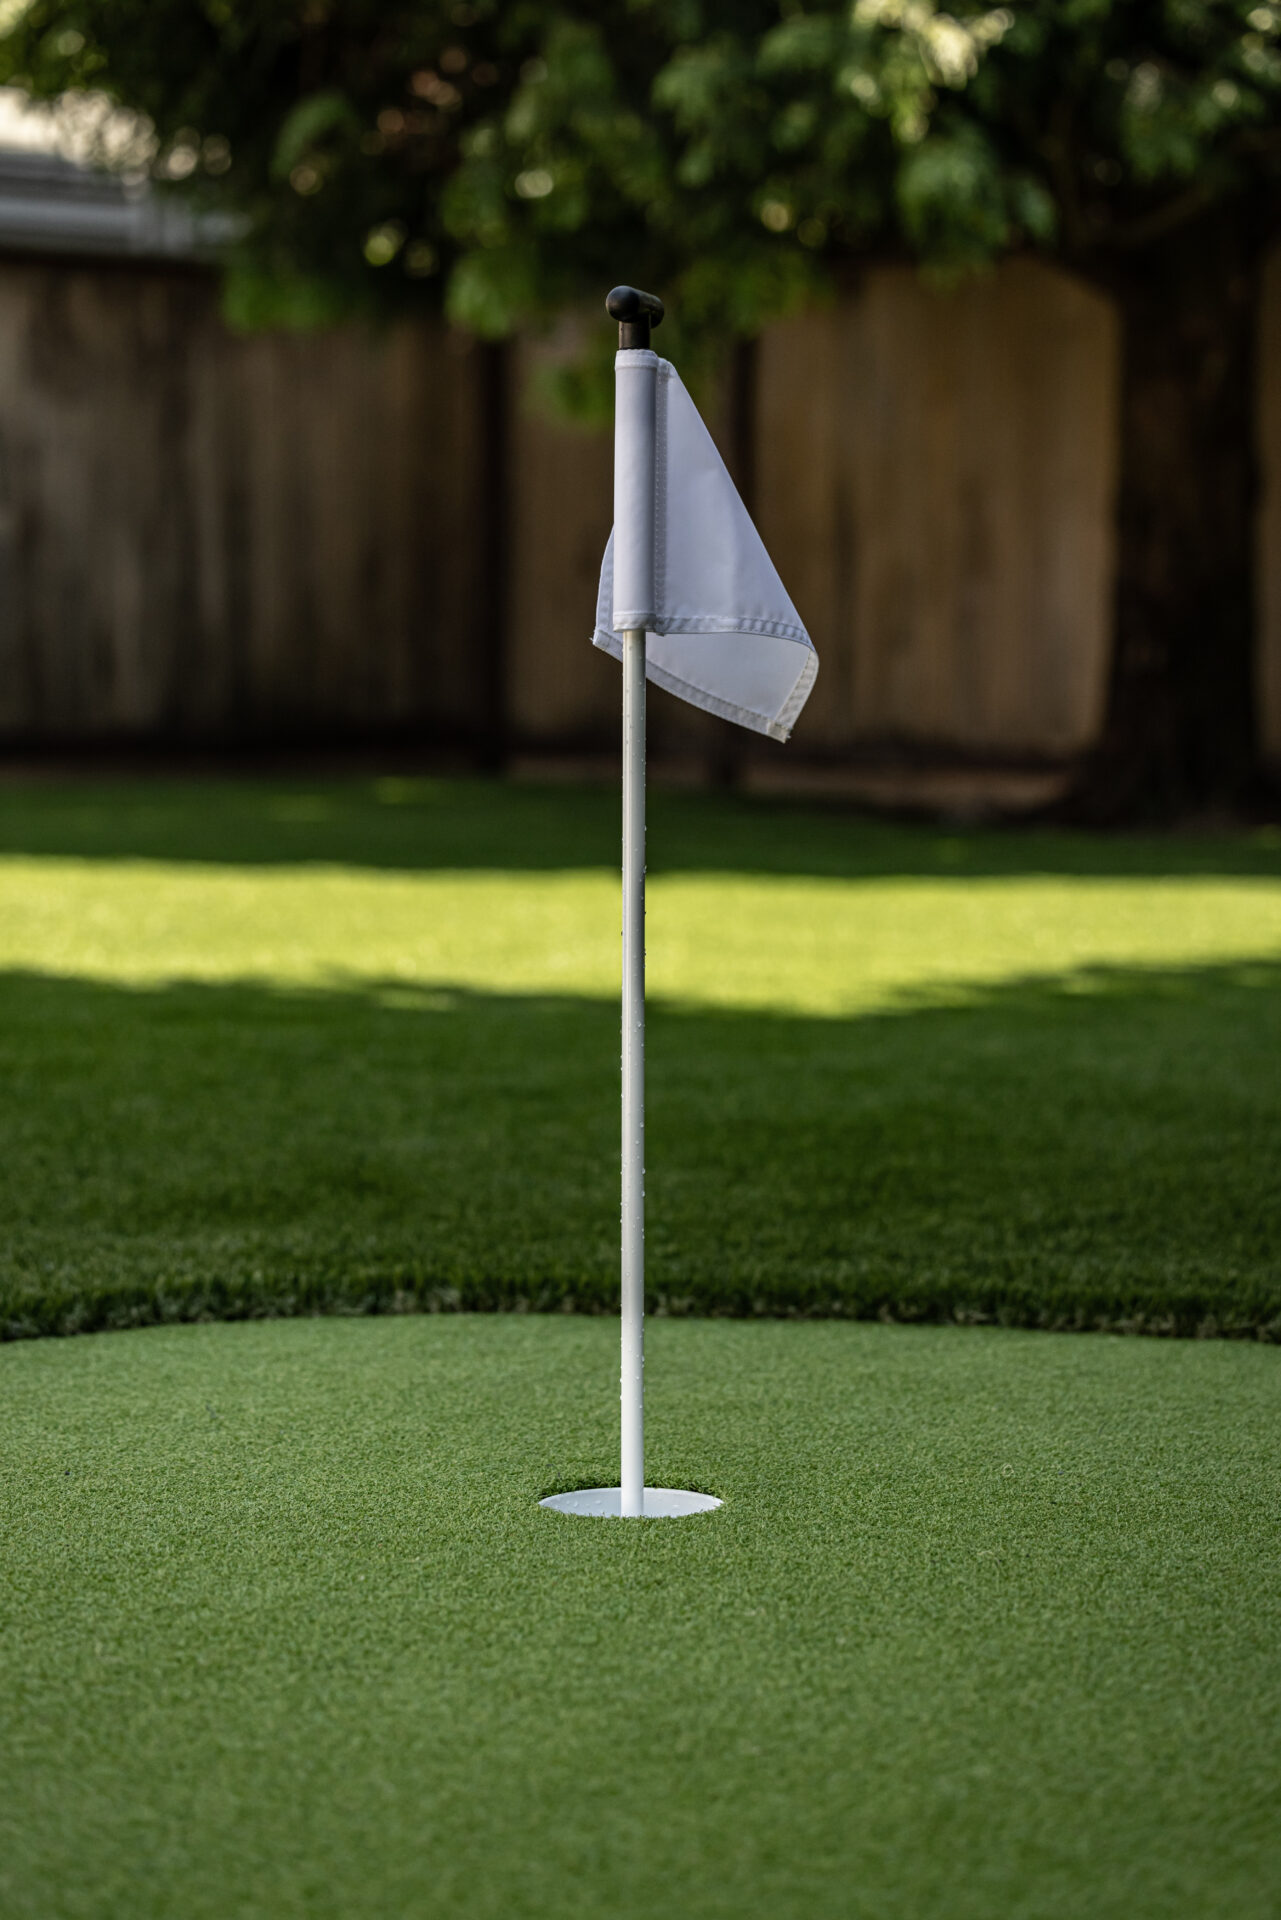 How to Get a Consistent Ball Roll on Artificial Putting Green